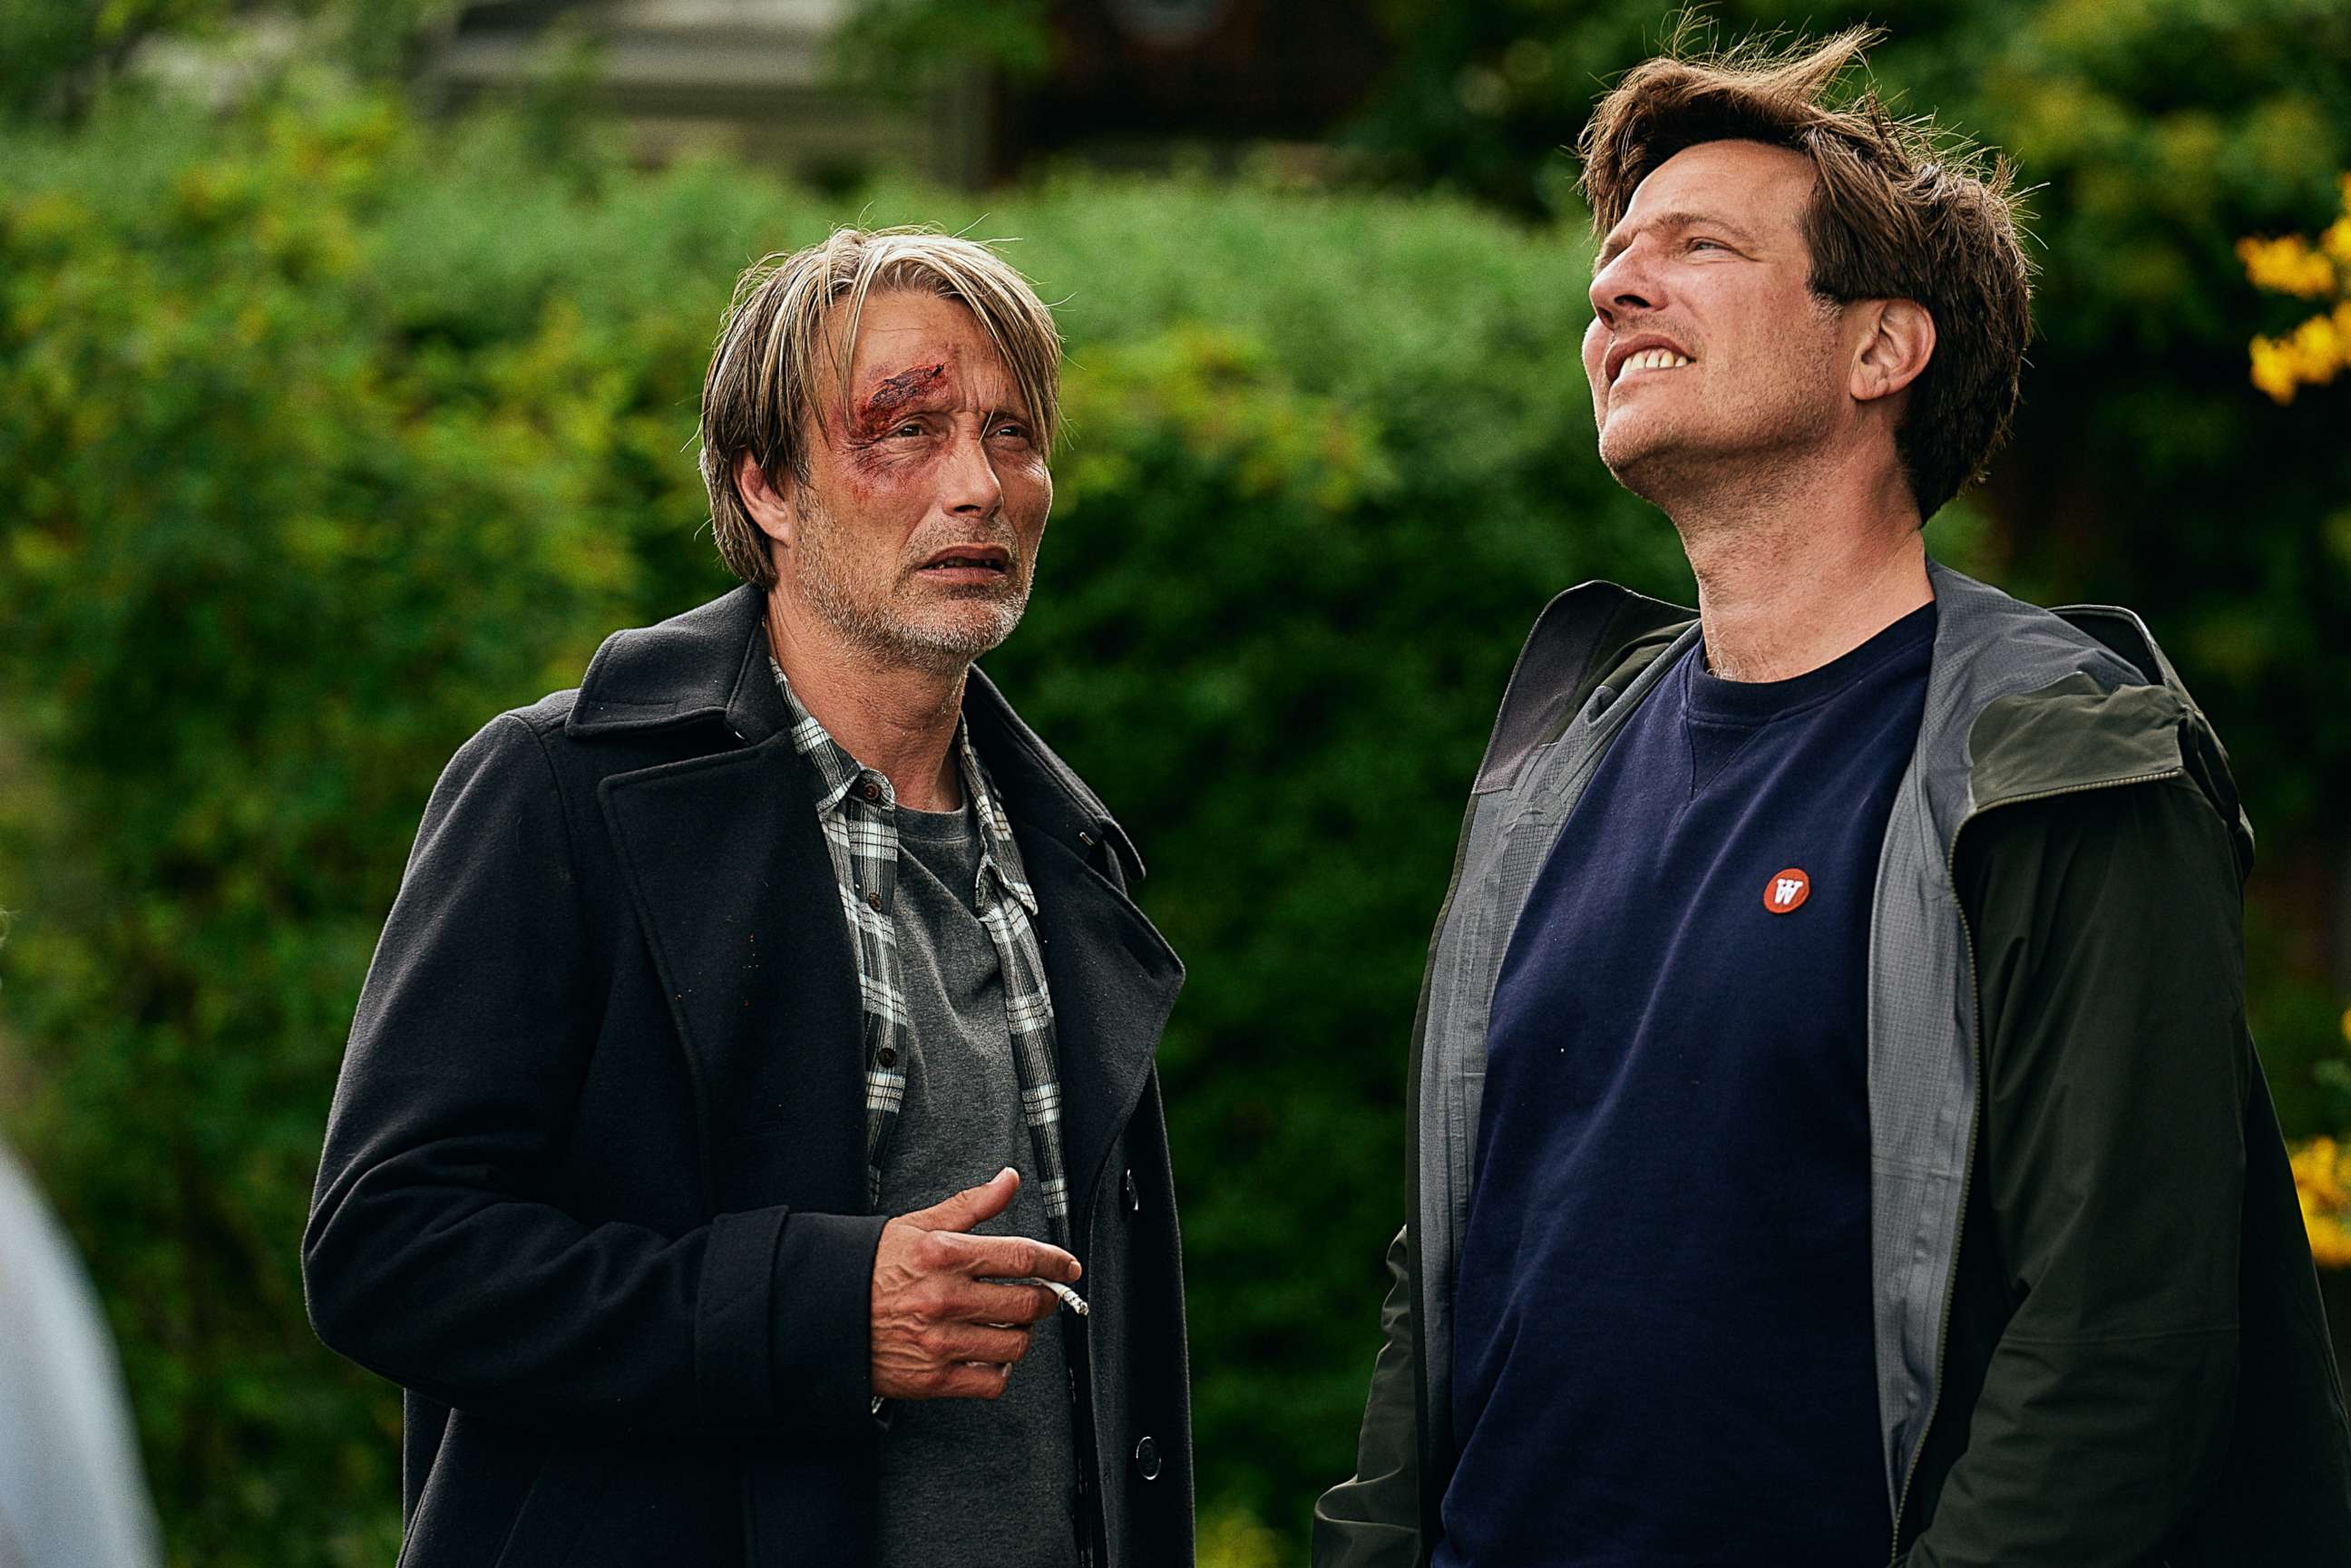 PHOTO: This image released by Samuel Goldwyn Films shows Mads Mikkelsen, left, with director Thomas Vinterberg on the set of "Another Round."